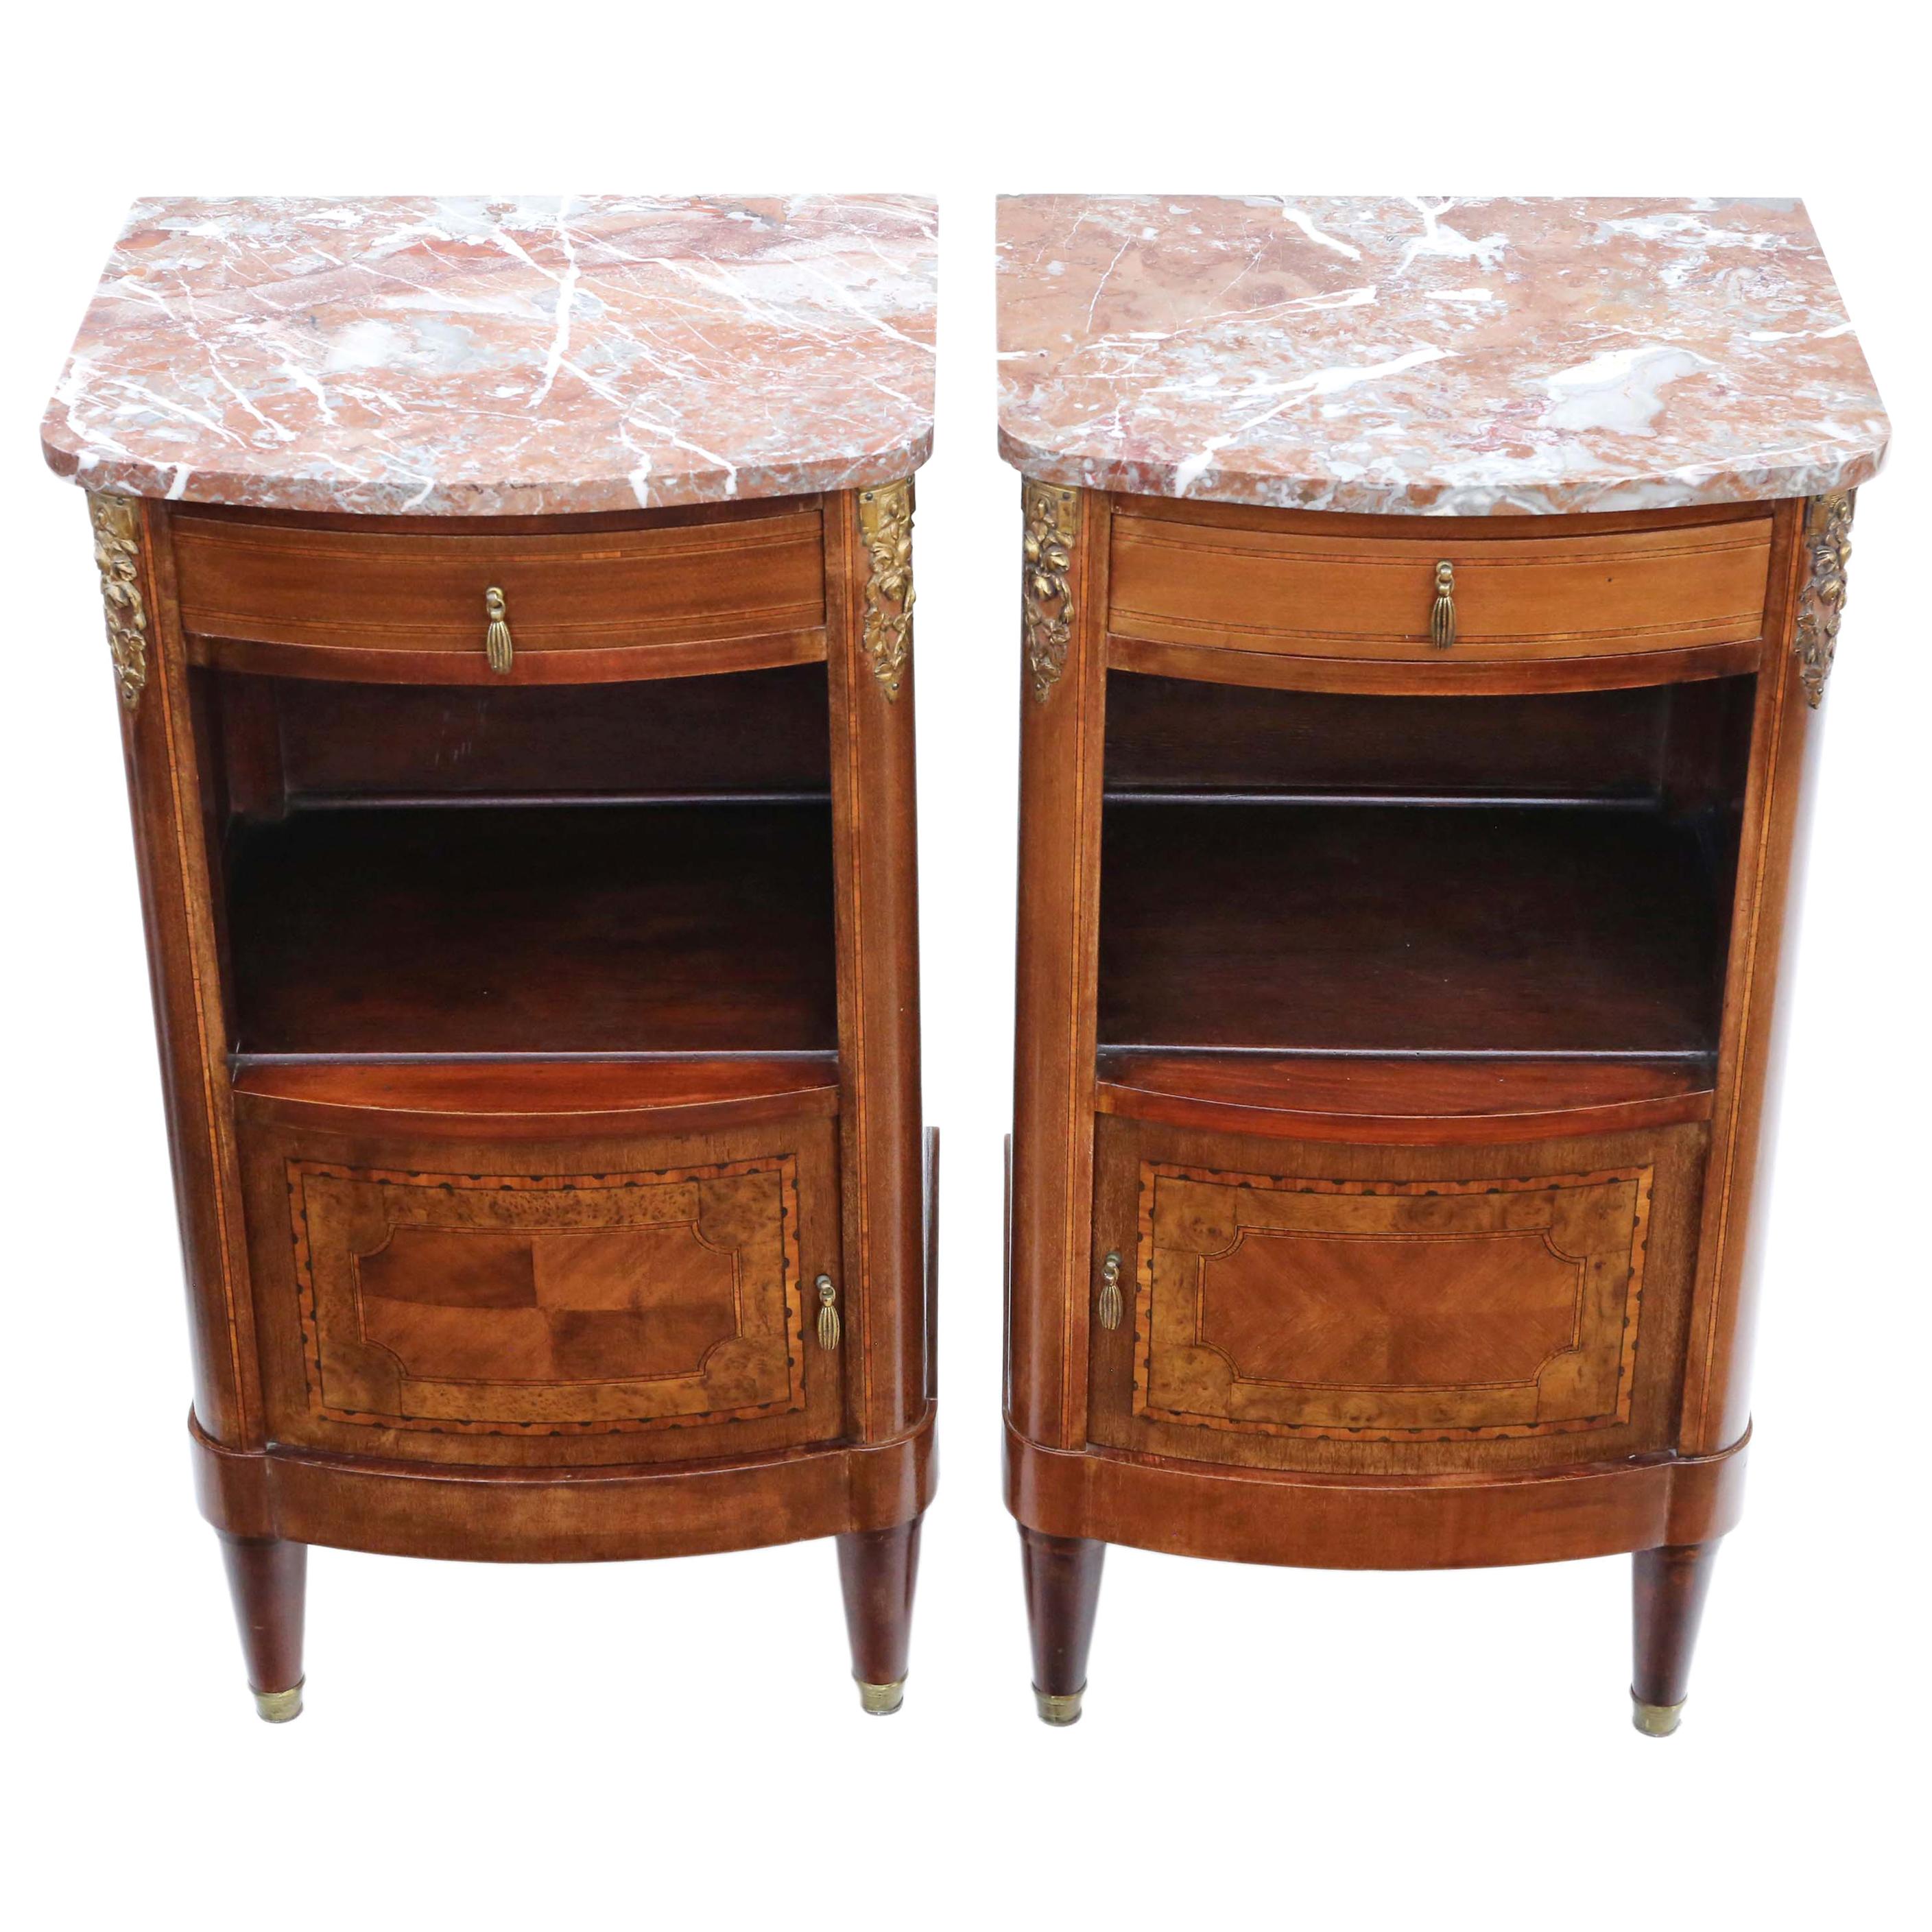 Antique Pair of French Marquetry Bedside Tables Cupboards Marble